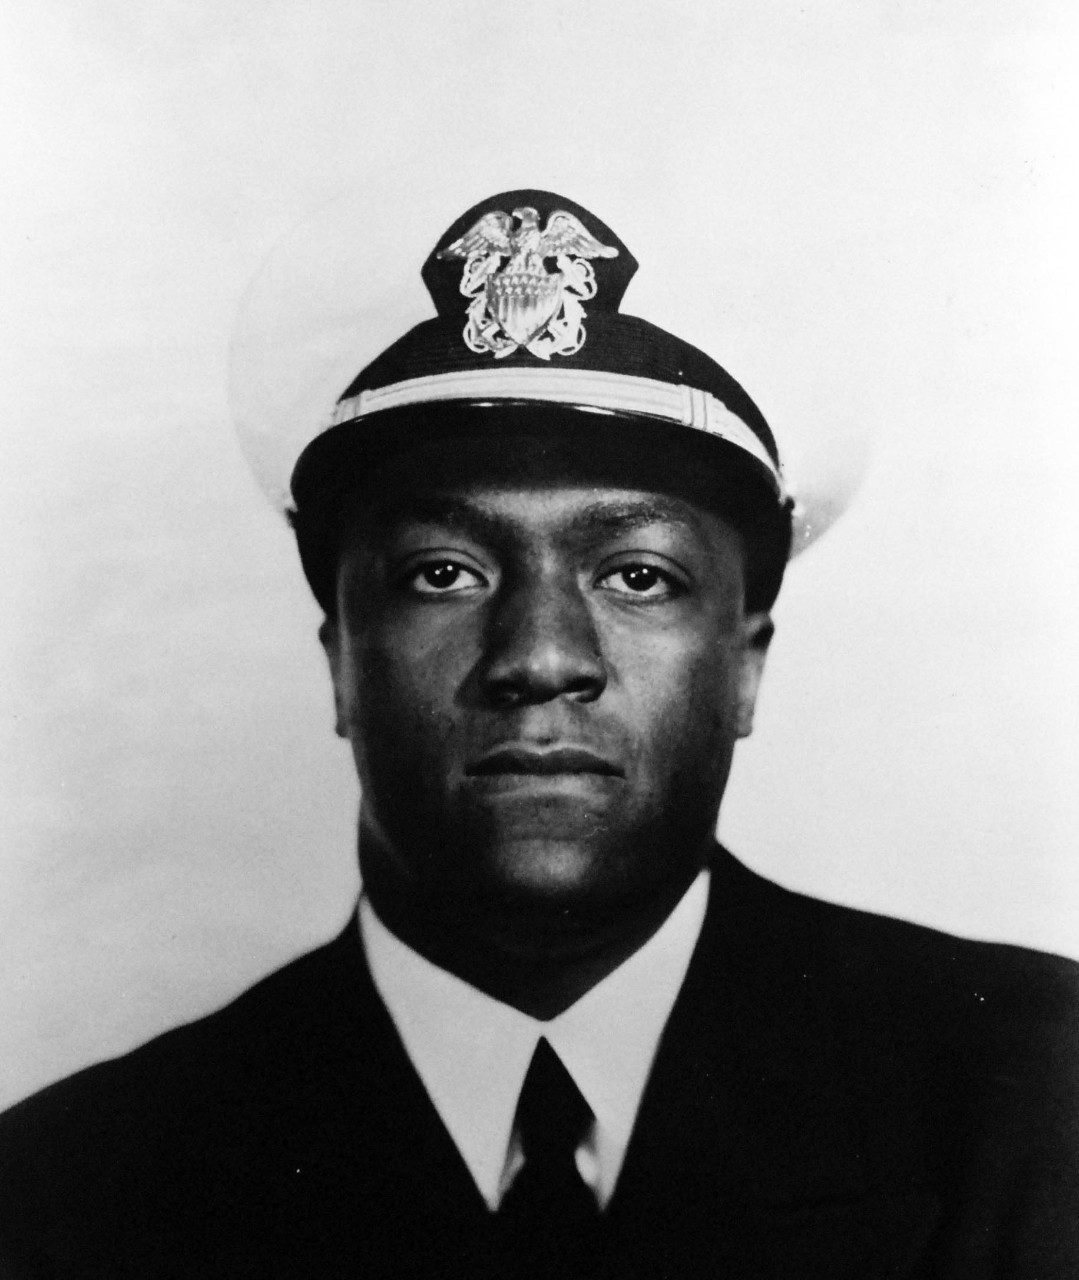 80-G-428467:  Lieutenant Edward J. Odom, ChC, USNR, May 1951.  Odom was an African American Chaplain.    Official U.S. Navy photograph, now in the collections of the National Archives.  